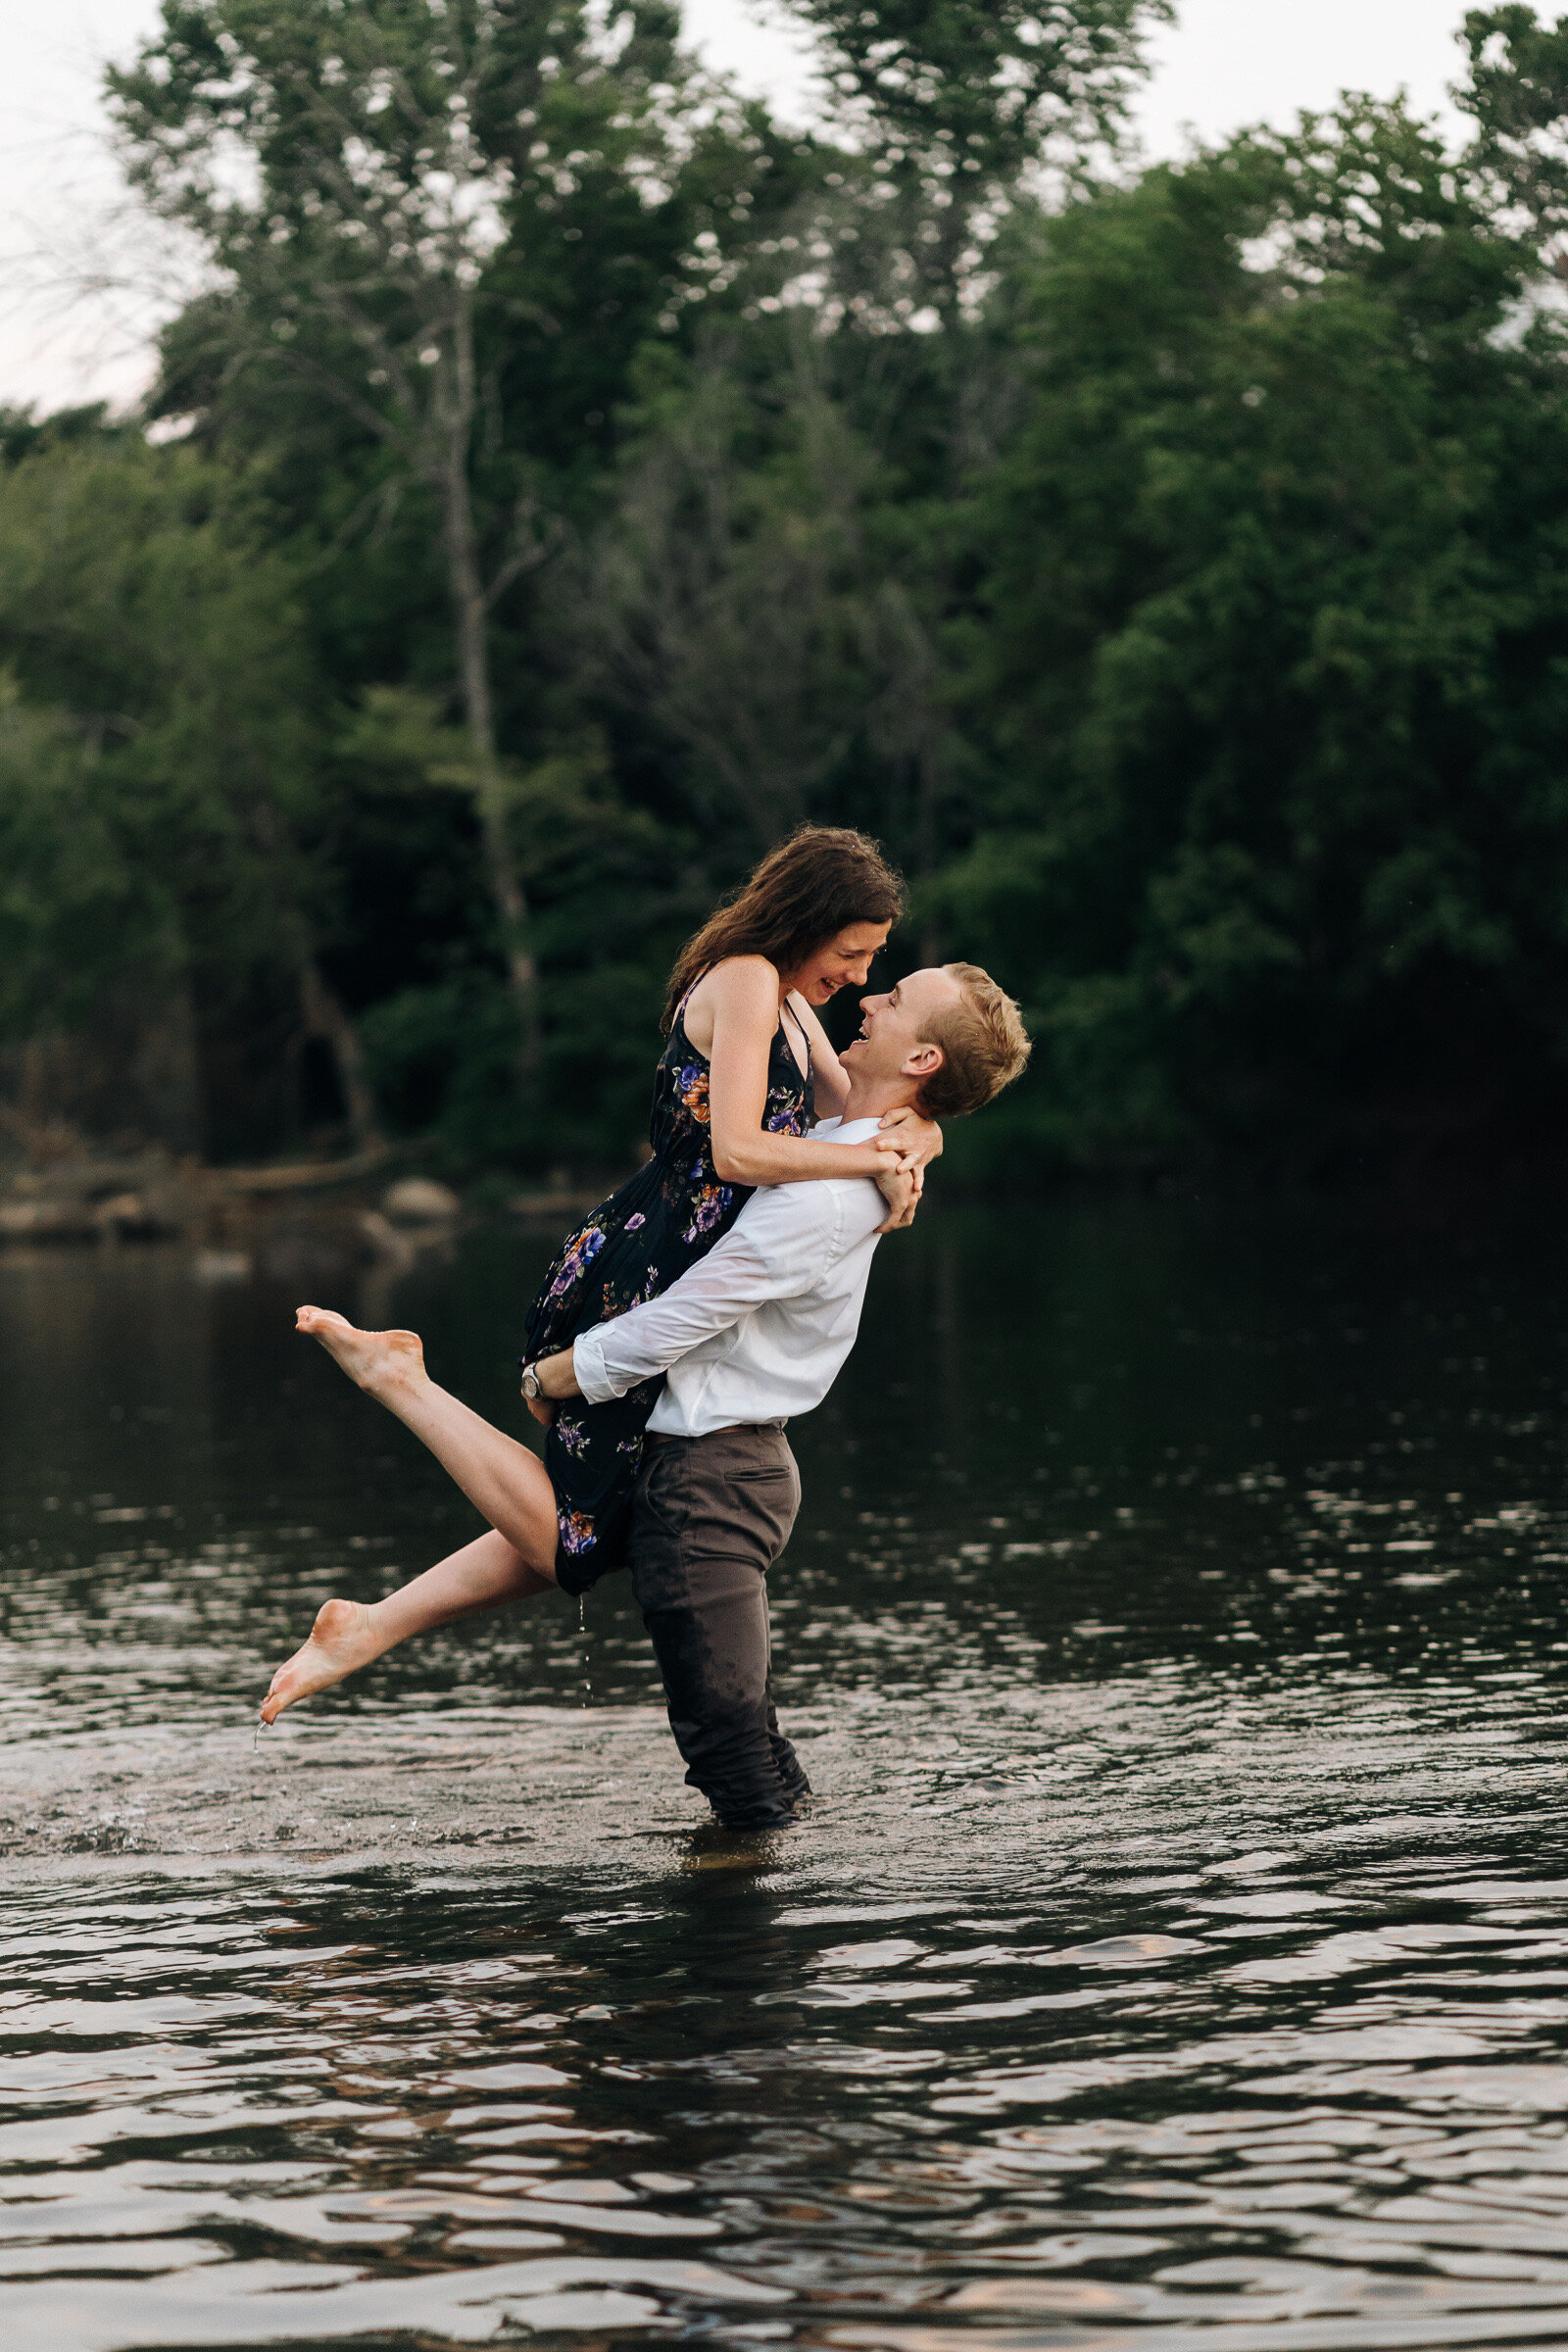 grant-rachel-downtown-lynchburg-virginia-summer-lifestyle-in-the-river-romantic-flirty-and-fun-engagement-session-by-jonathan-hannah-photography-23.jpg